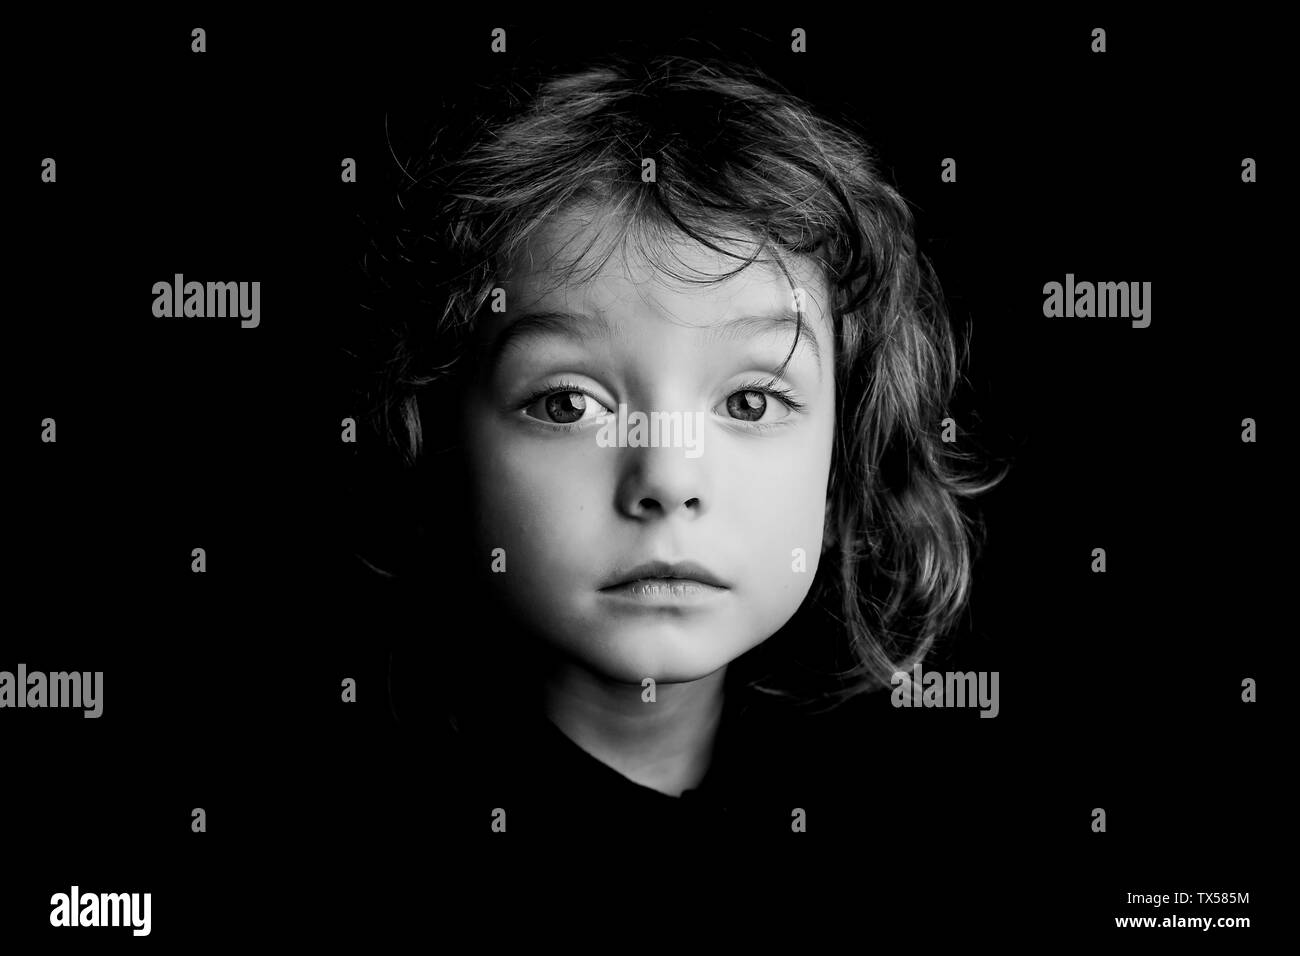 5 year old boy with long hair black and white studio portrait Stock Photo